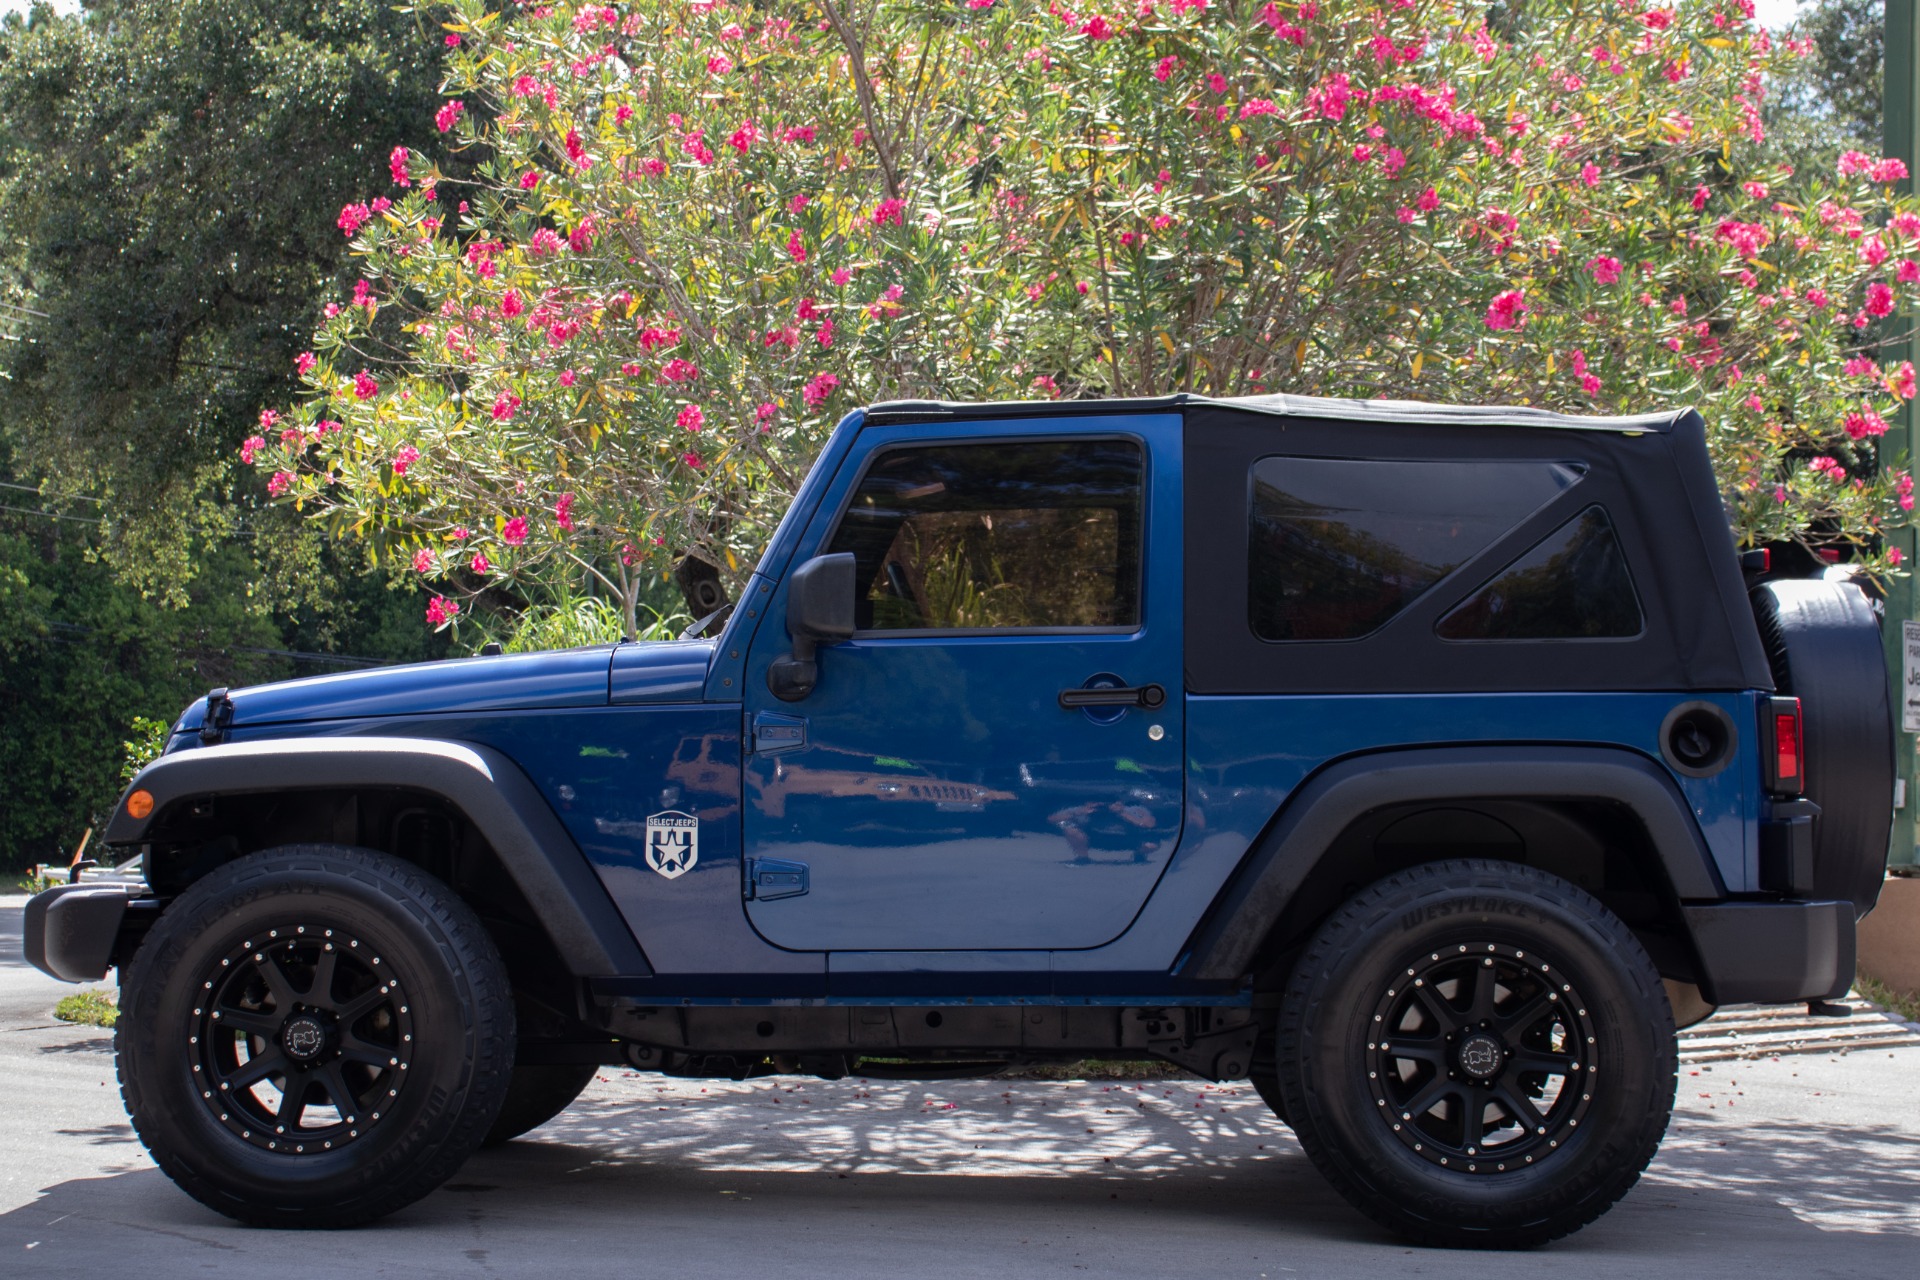 Used 2009 Jeep Wrangler X For Sale ($15,995) | Select Jeeps Inc. Stock  #771238